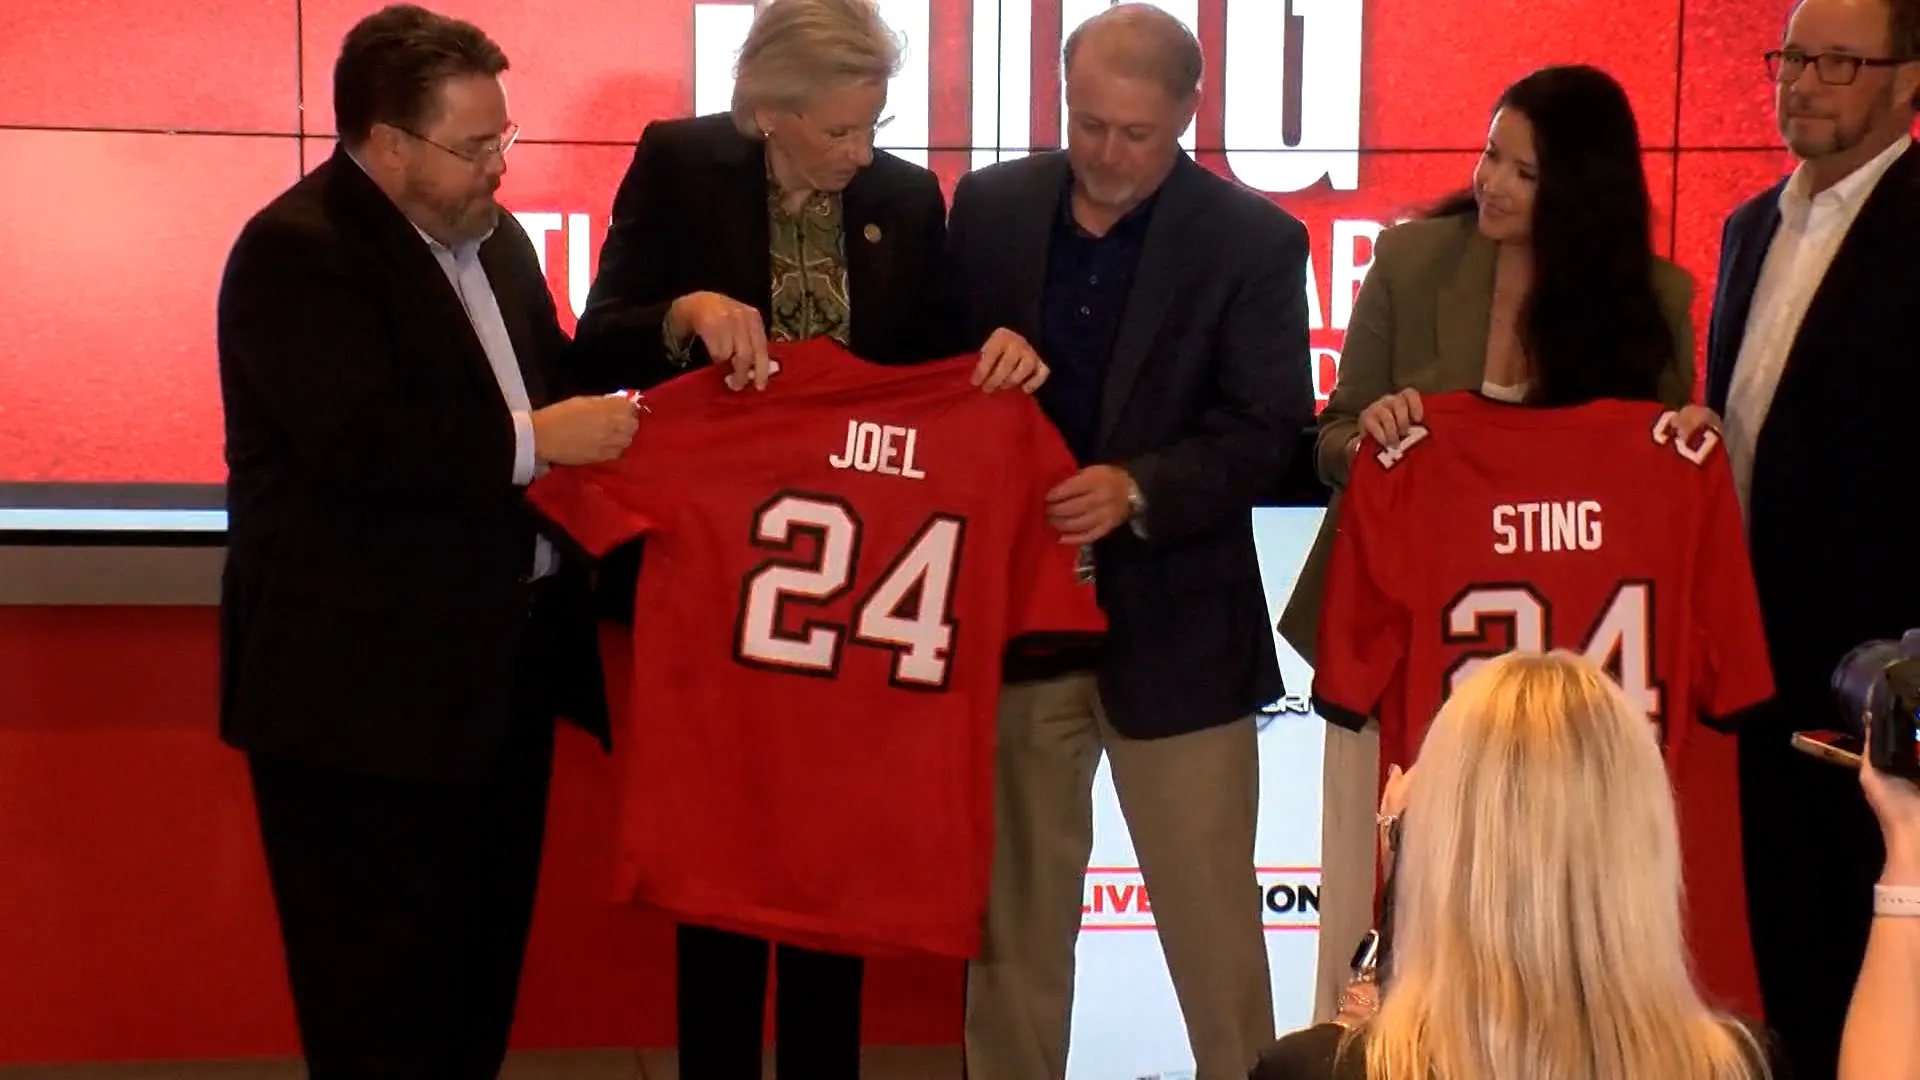 It's official! Billy Joel and Sting will be rocking Raymond James Stadium on February 24, 2024. Get your tickets now!